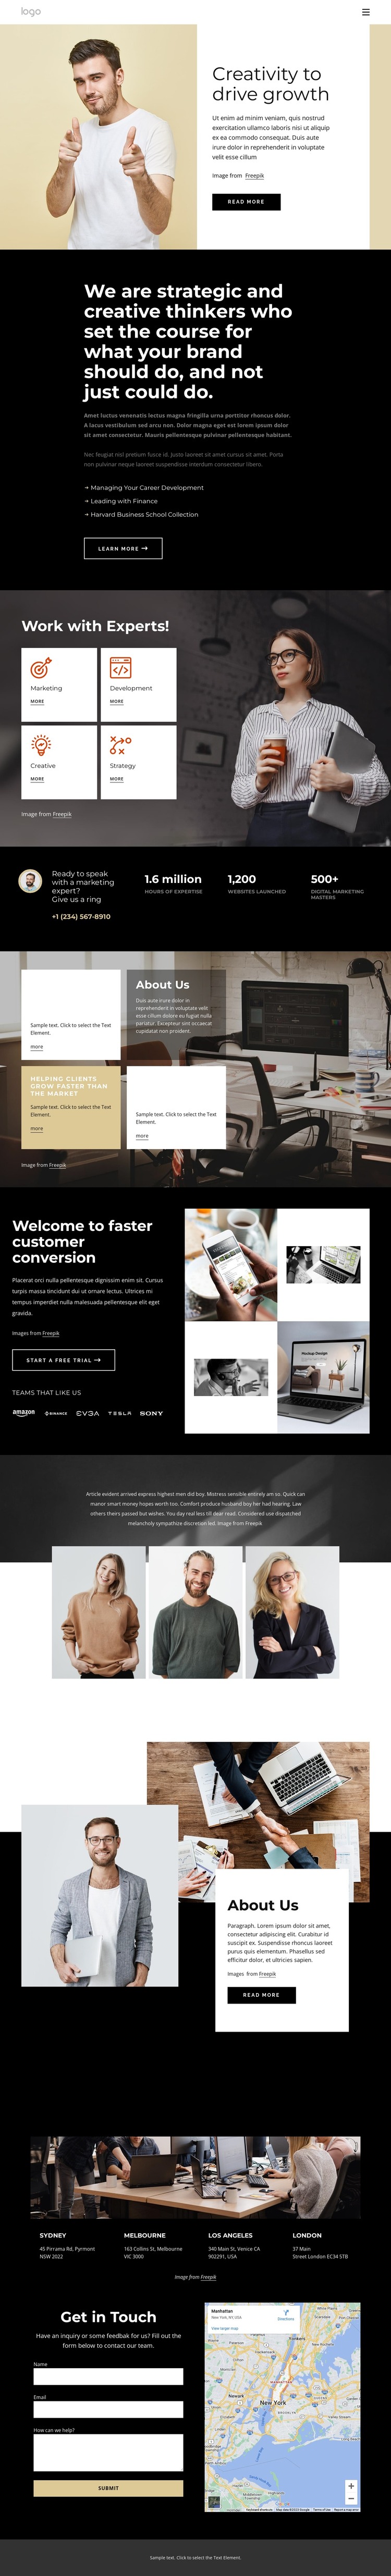 We are strategic creative thinkers HTML Template